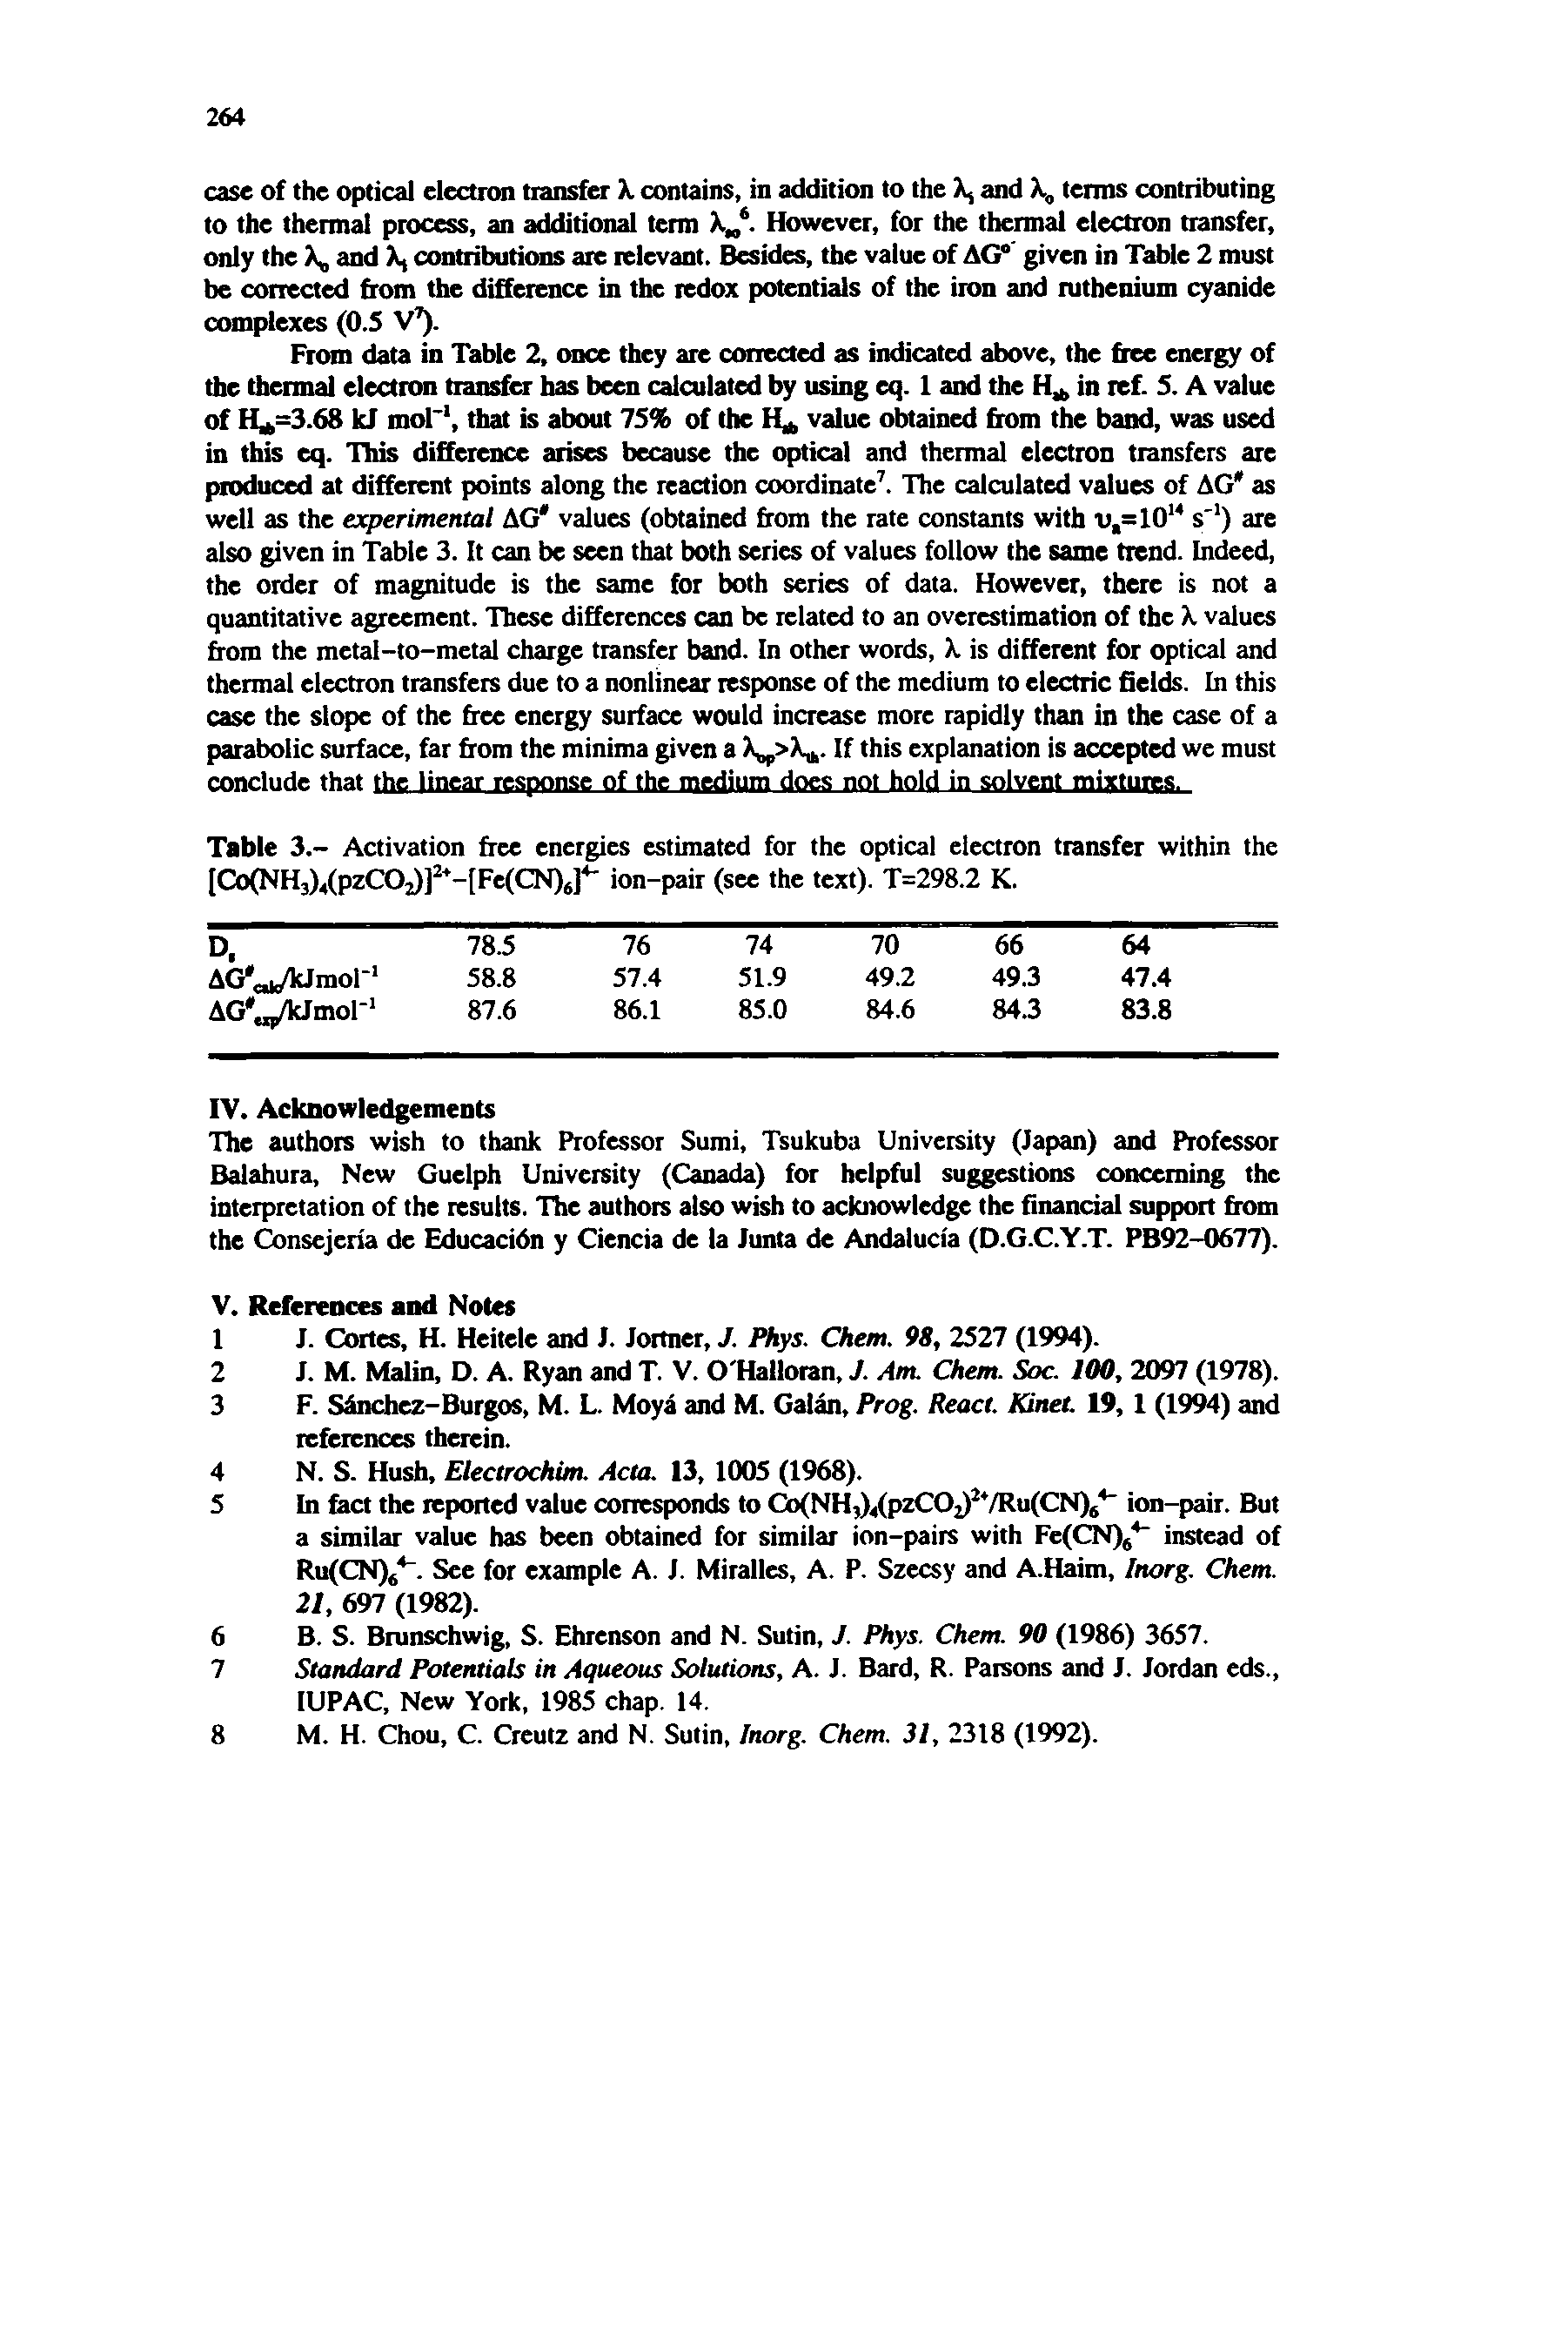 Table 3.- Activation free energies estimated for the optical electron transfer within the [Co(NH3)4(pzC02)] -[Fe(CN)J ion-pair (see the text). T=298.2 K.